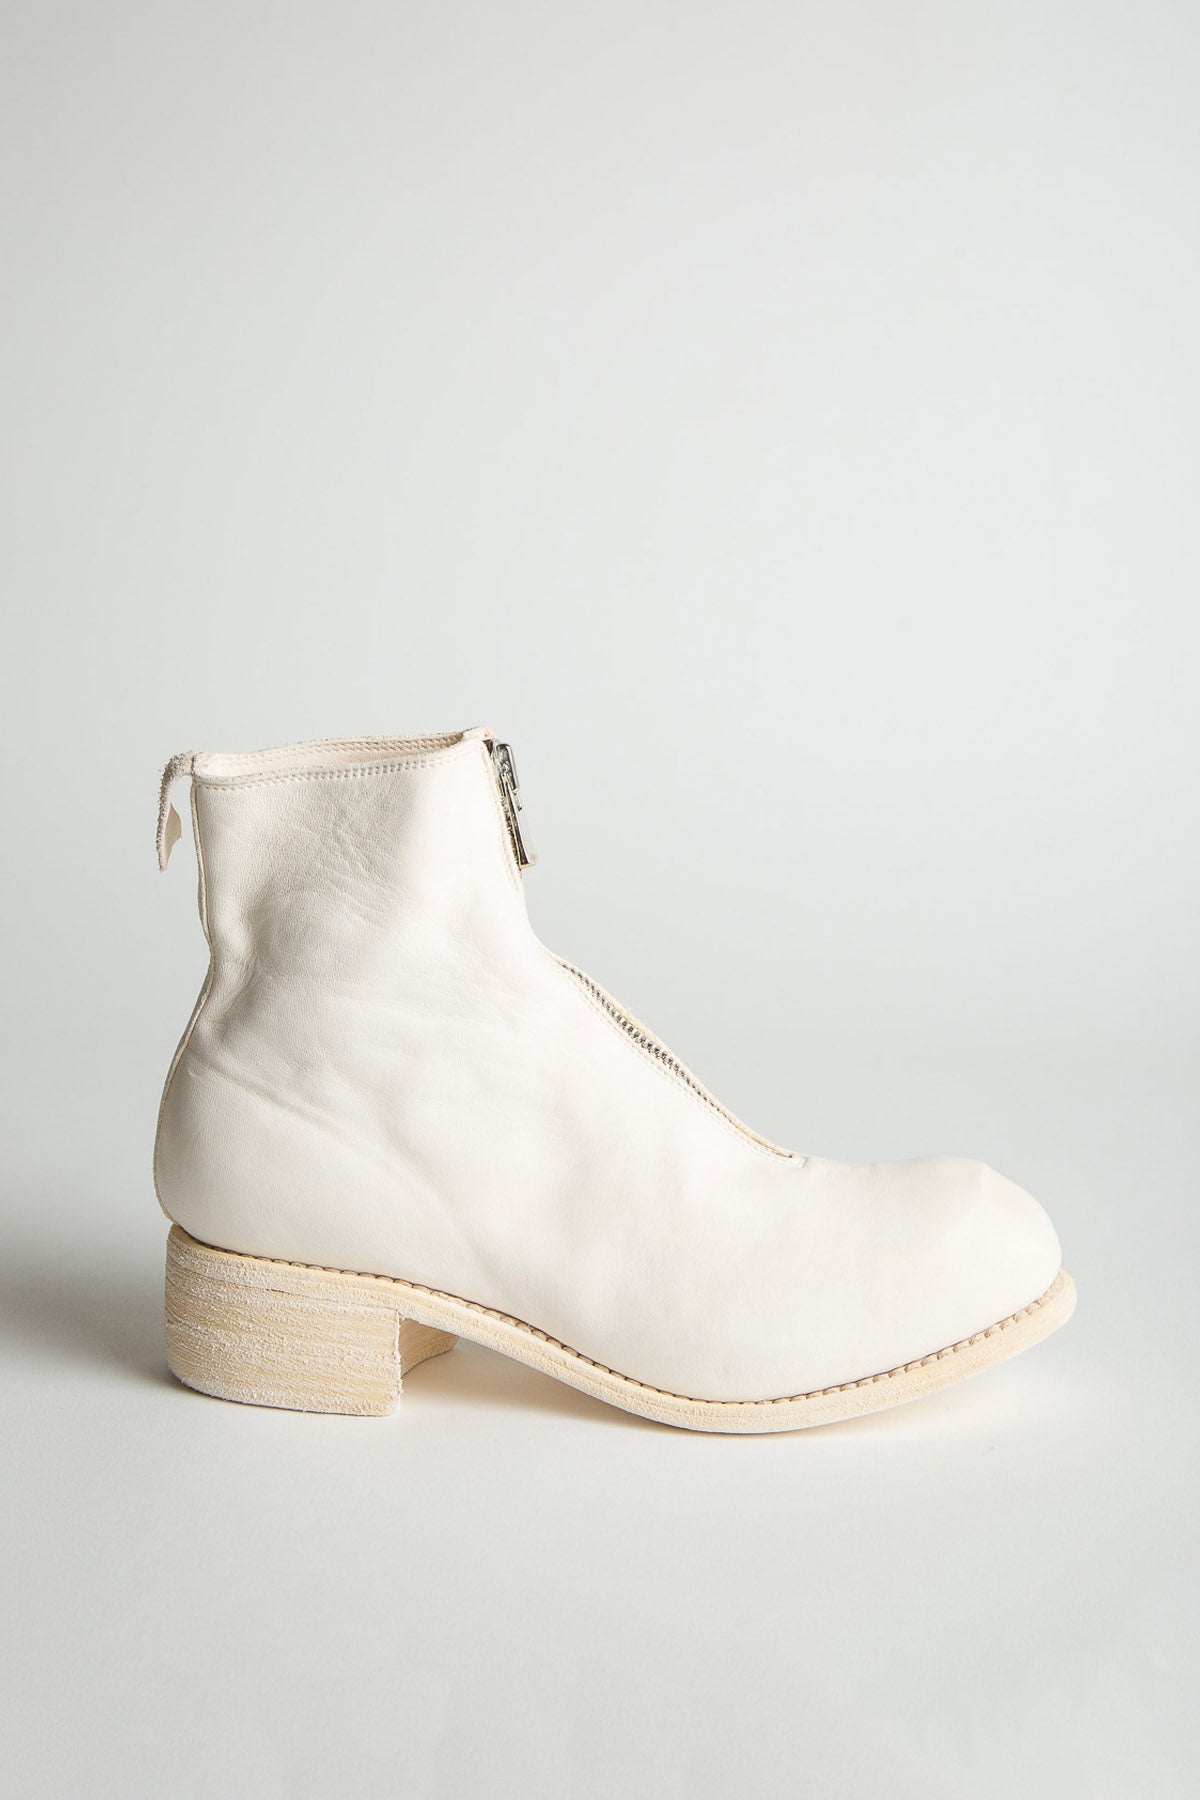 GUIDI | ORTHOPAEDIC FRONT ZIP BOOTS